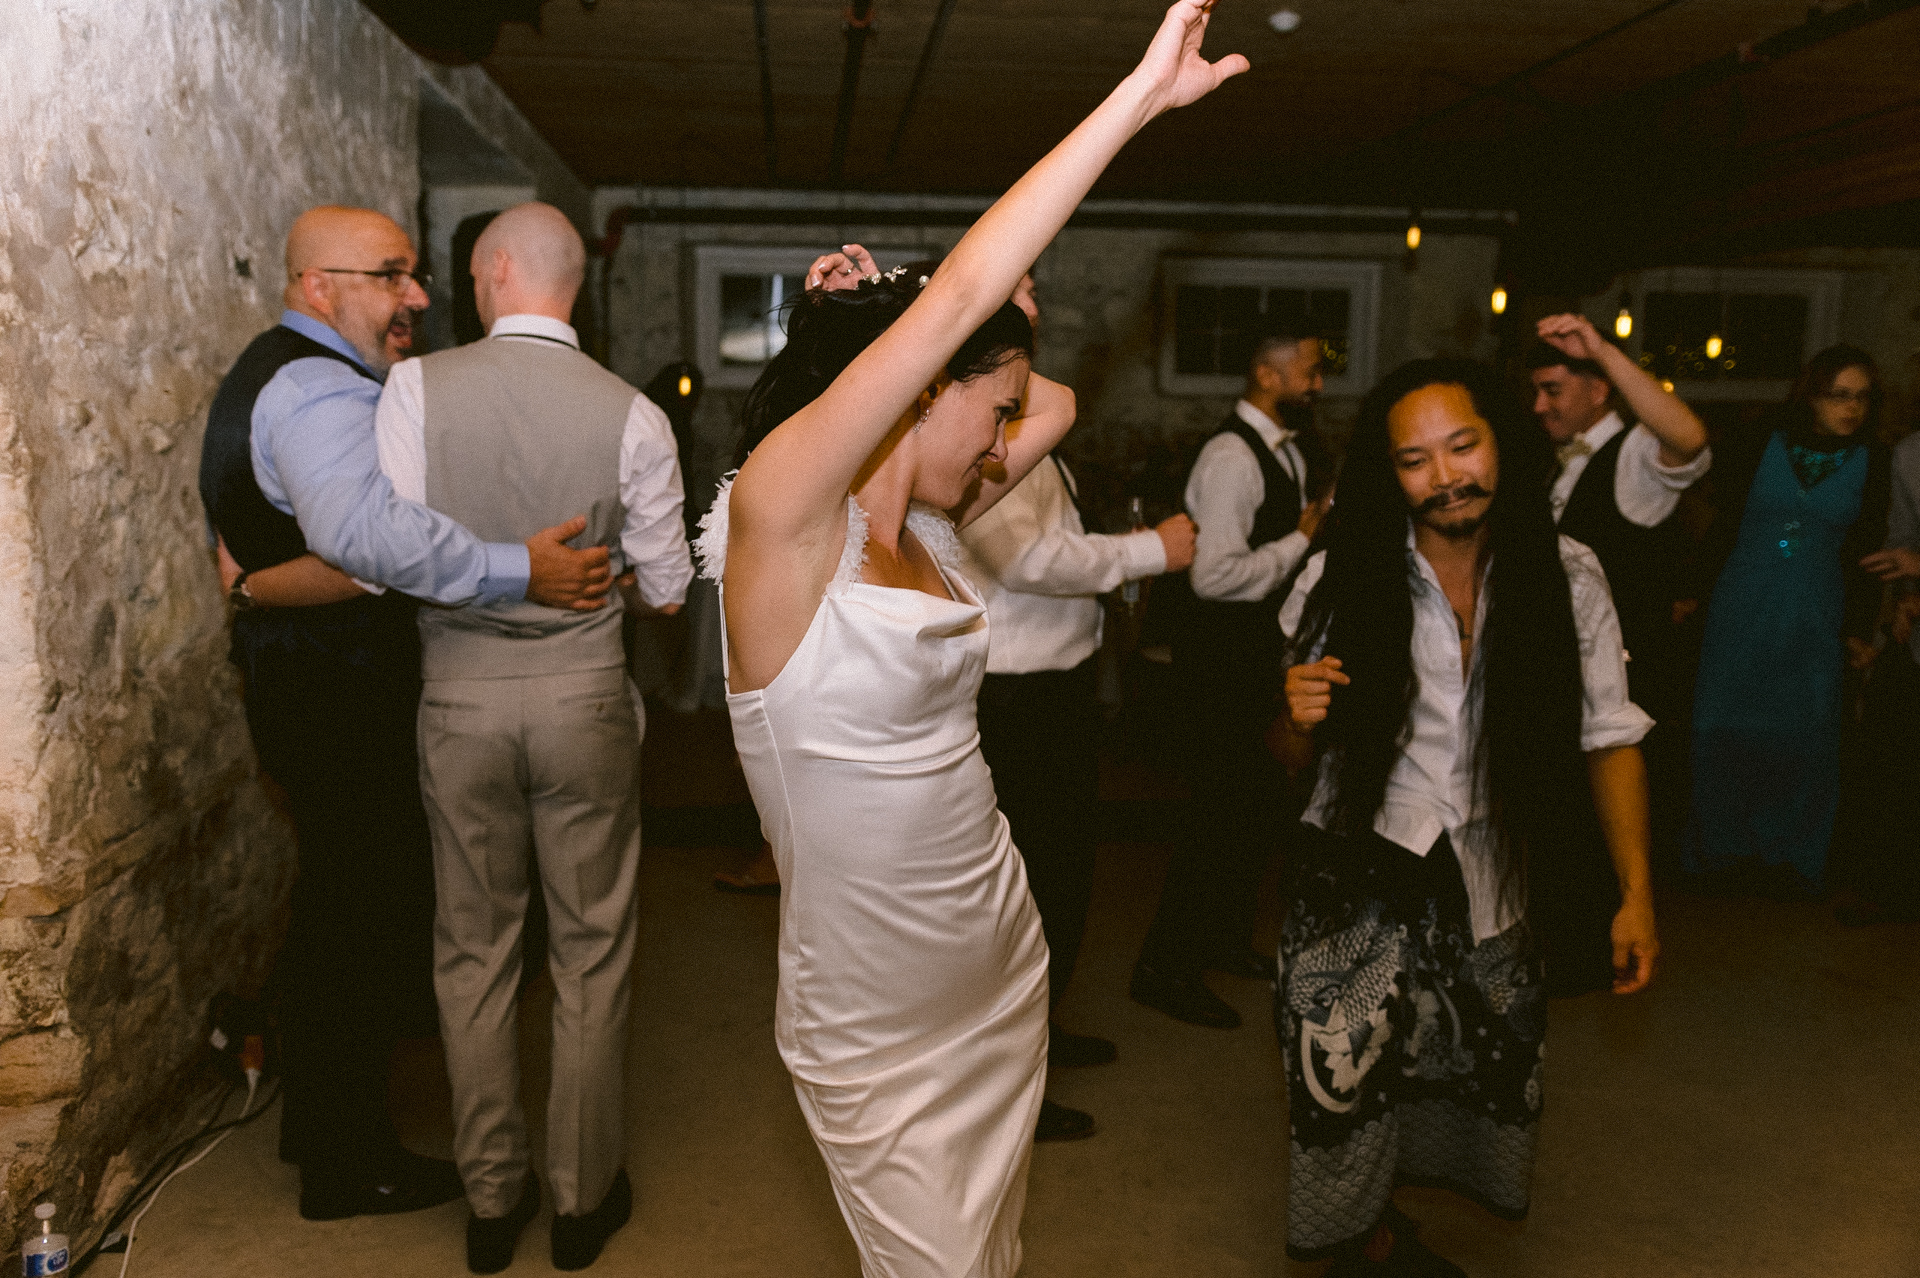 A bride joined her guests dancing at the dance floor at Cambium Farms.